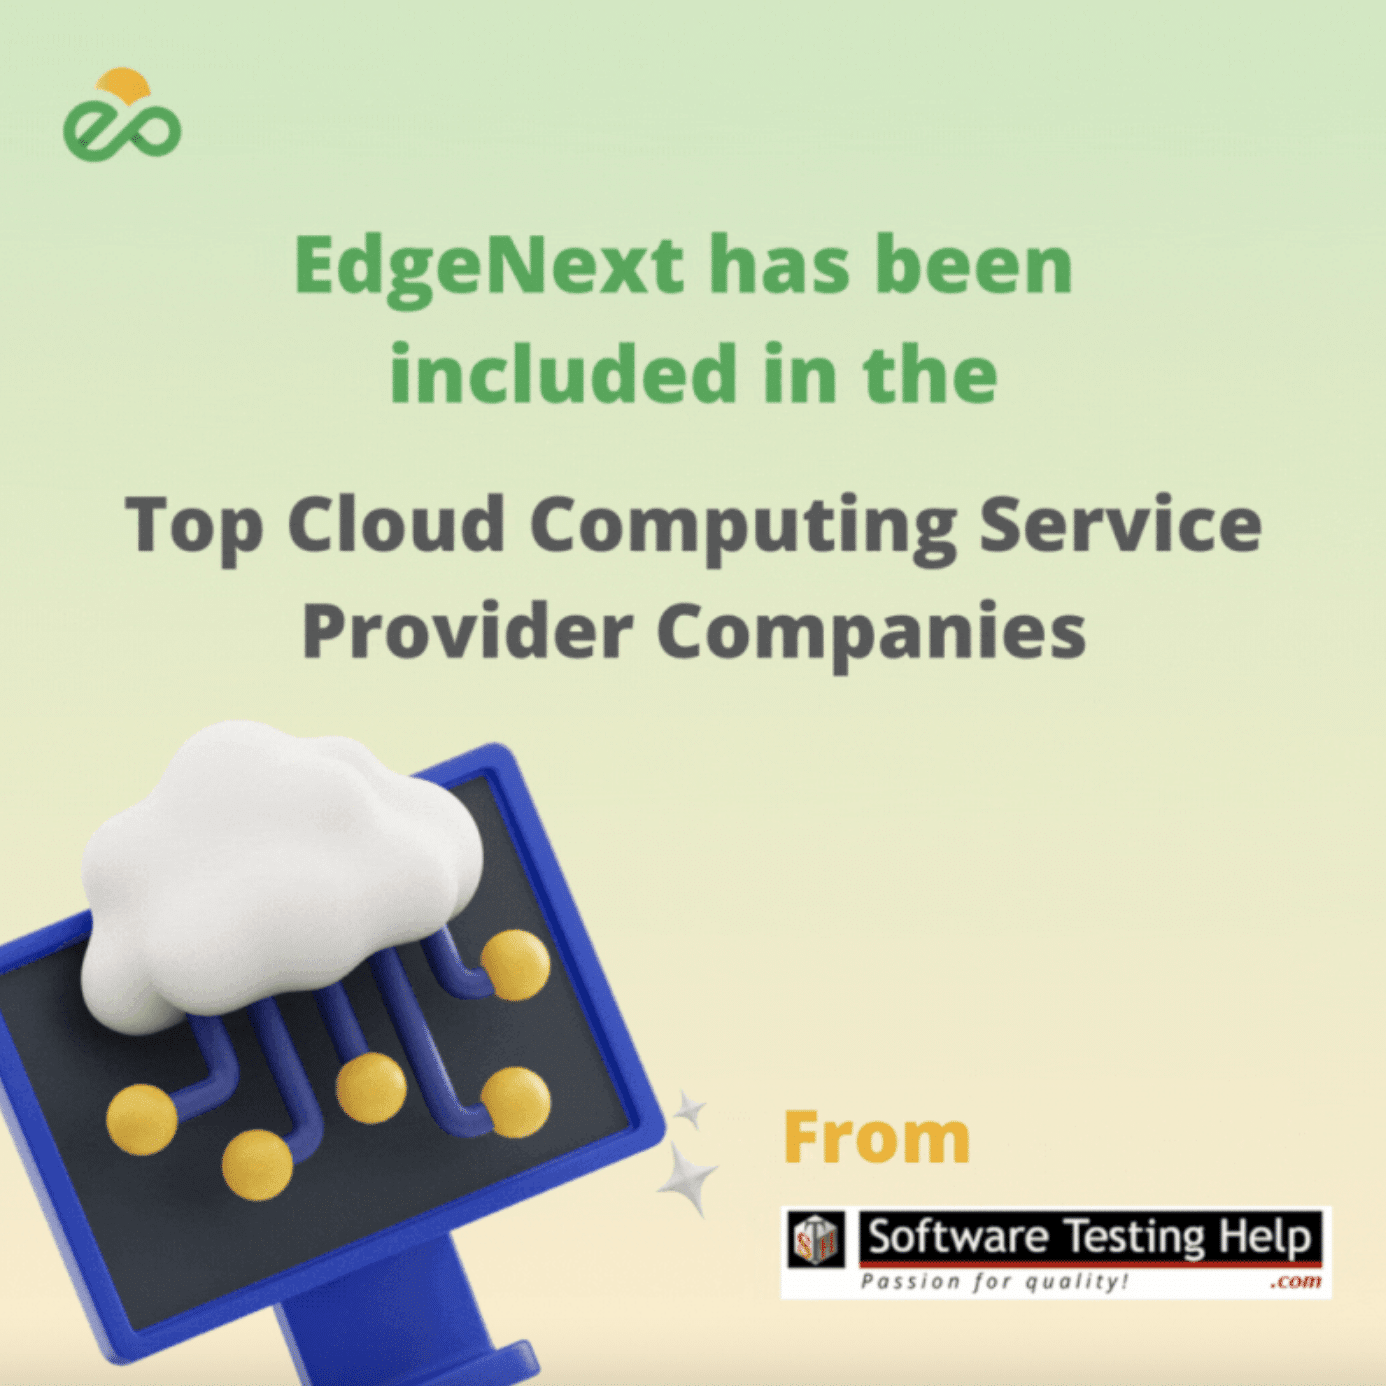 EdgeNext has been included in the Top Cloud Computing Service Provider Companies by Software Testing Help